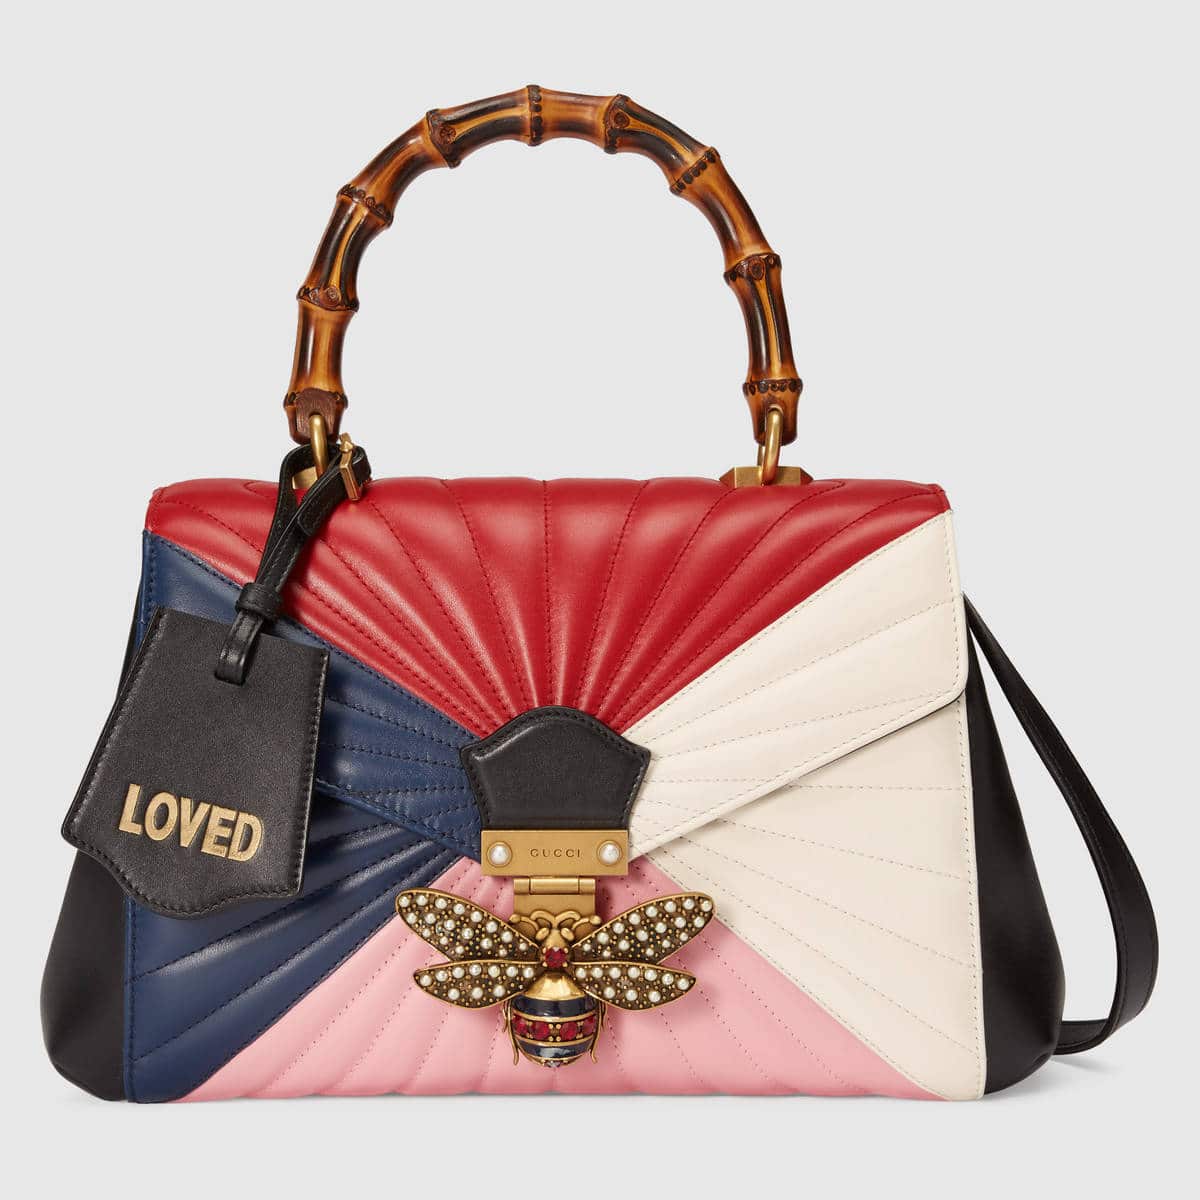 Gucci Bag Price List Reference Guide – Spotted Fashion